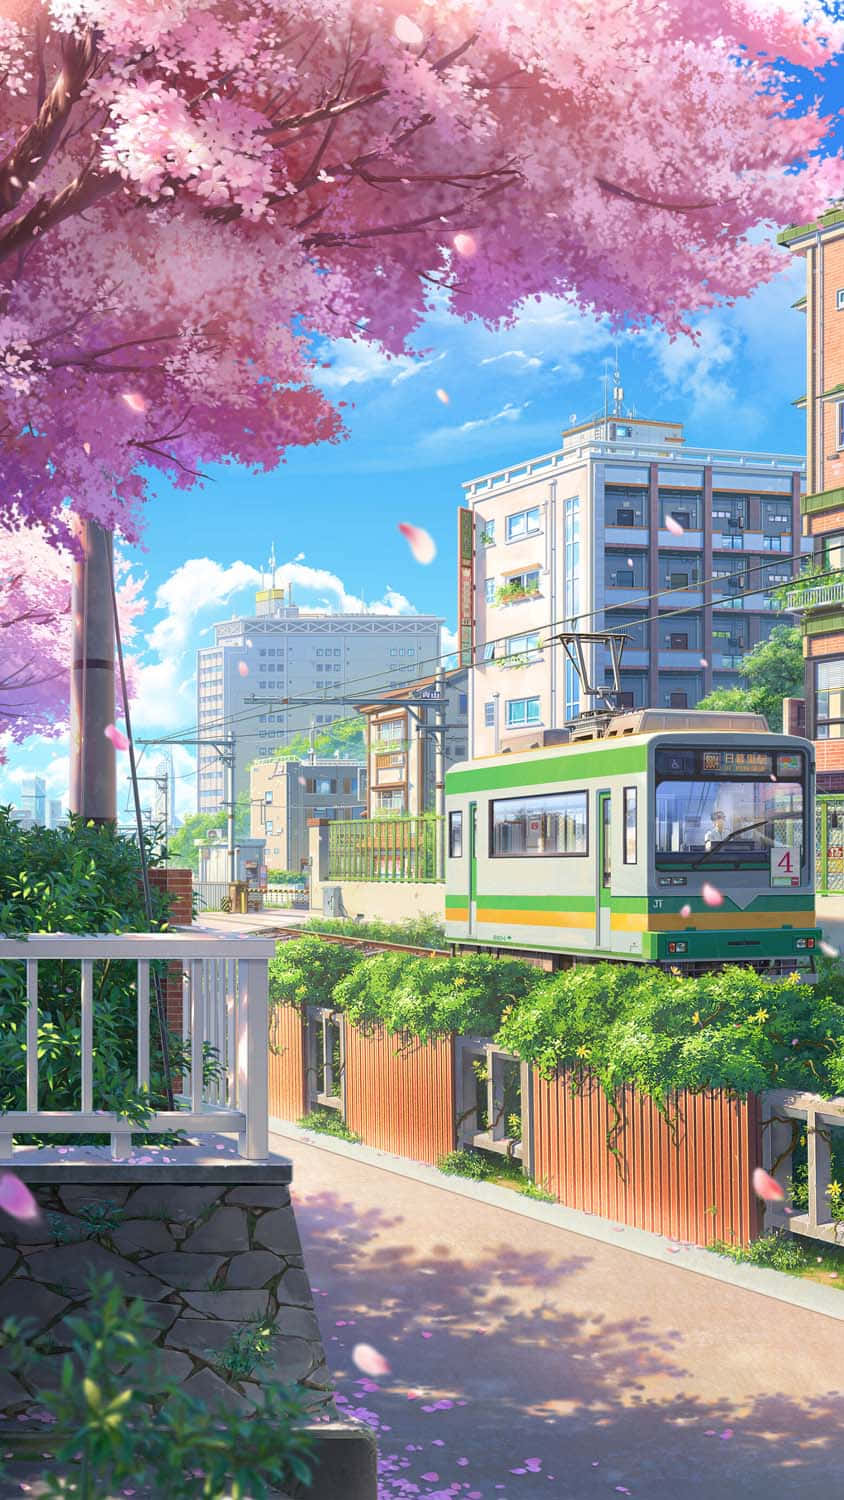 Download Tokyo Anime City With Cherry Blossom Tree Wallpaper | Wallpapers .com